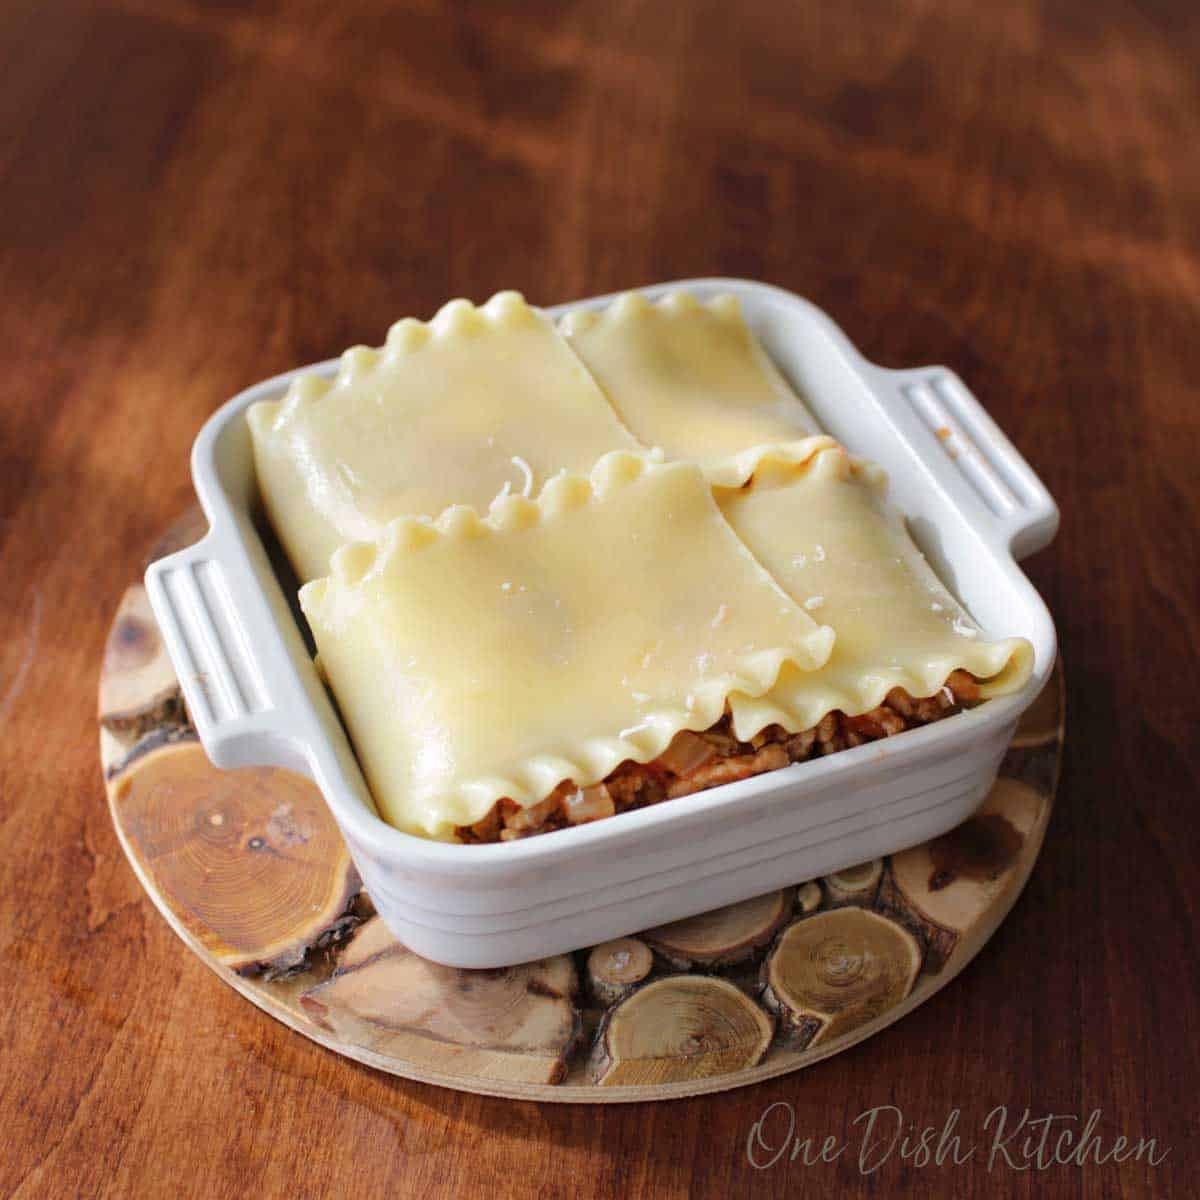 Mini lasagna with noodles folded over the mixture.